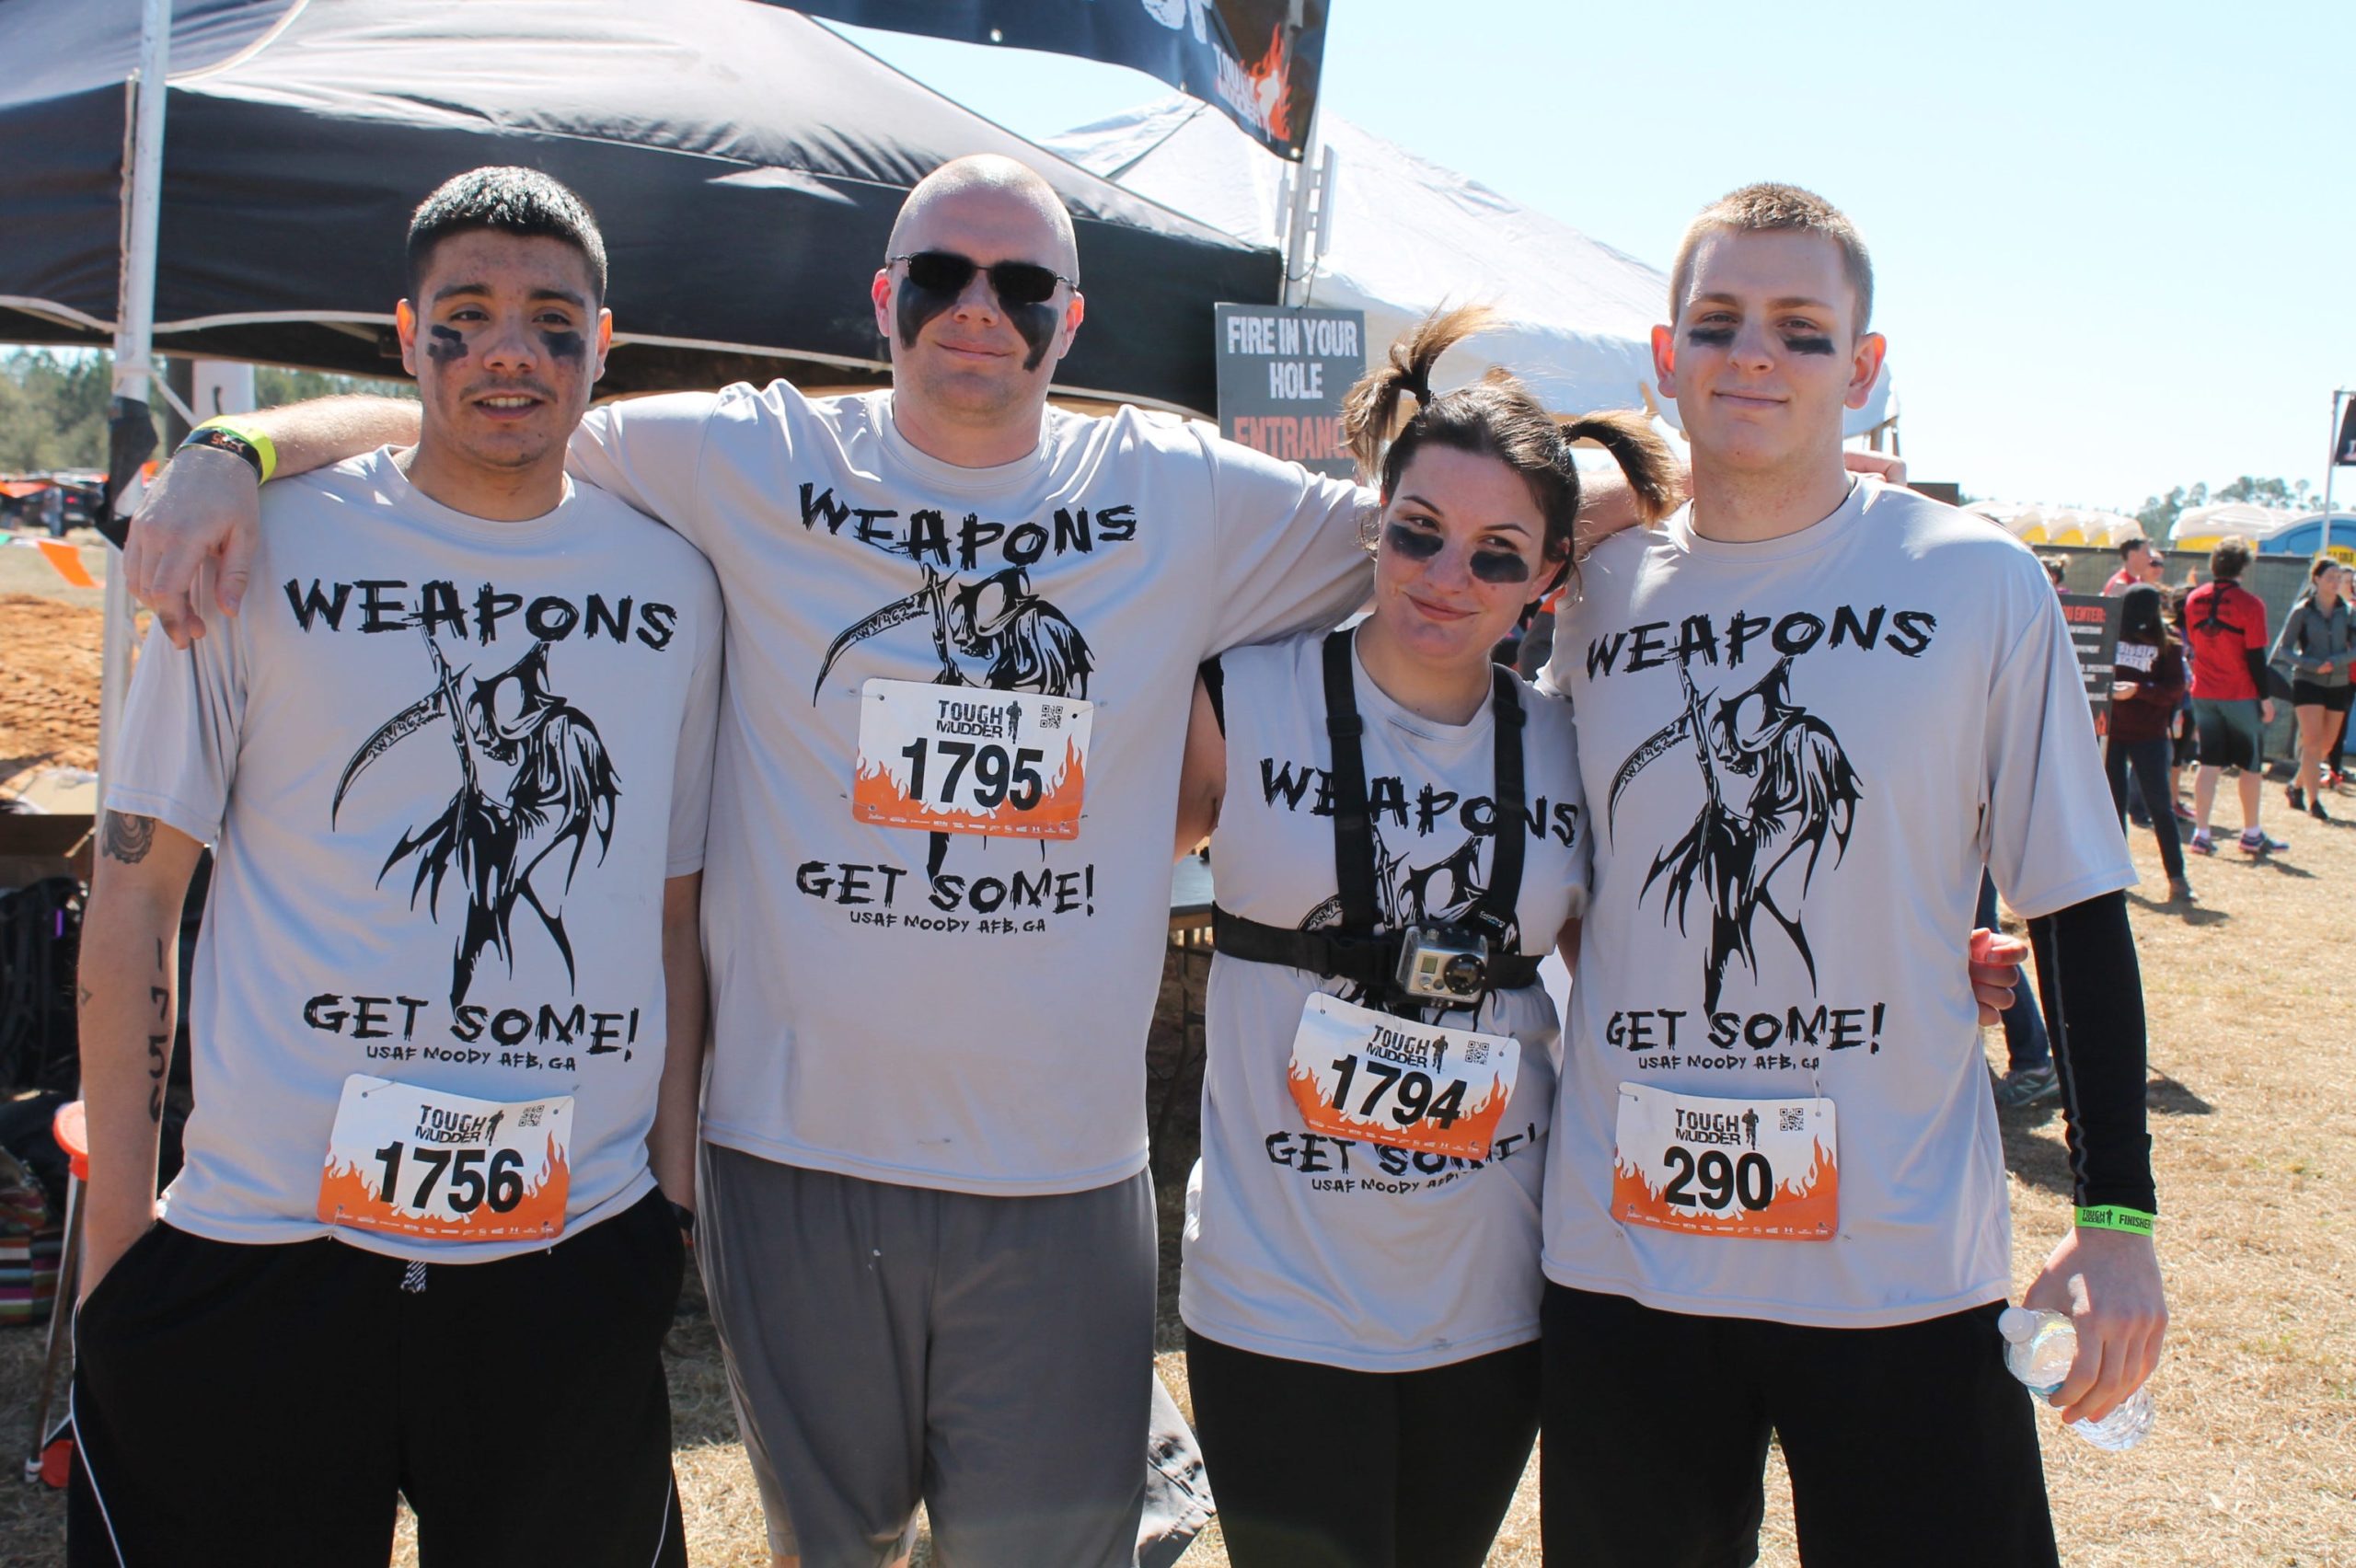 United States Air Force members from Moody AFB in Georgia ran the Tough Mudder. Nikolas Ramirez (left) and Tyler Chastain (right) ran it for the first time while Kraig Barritt and DeeAnn Thomas (middle left and middle right) each kissed the mud twice before. According to Tough Mudder's Economic Impact Report, over 60 percent of participants said they are likely to return to Santa Rosa County within the next year.